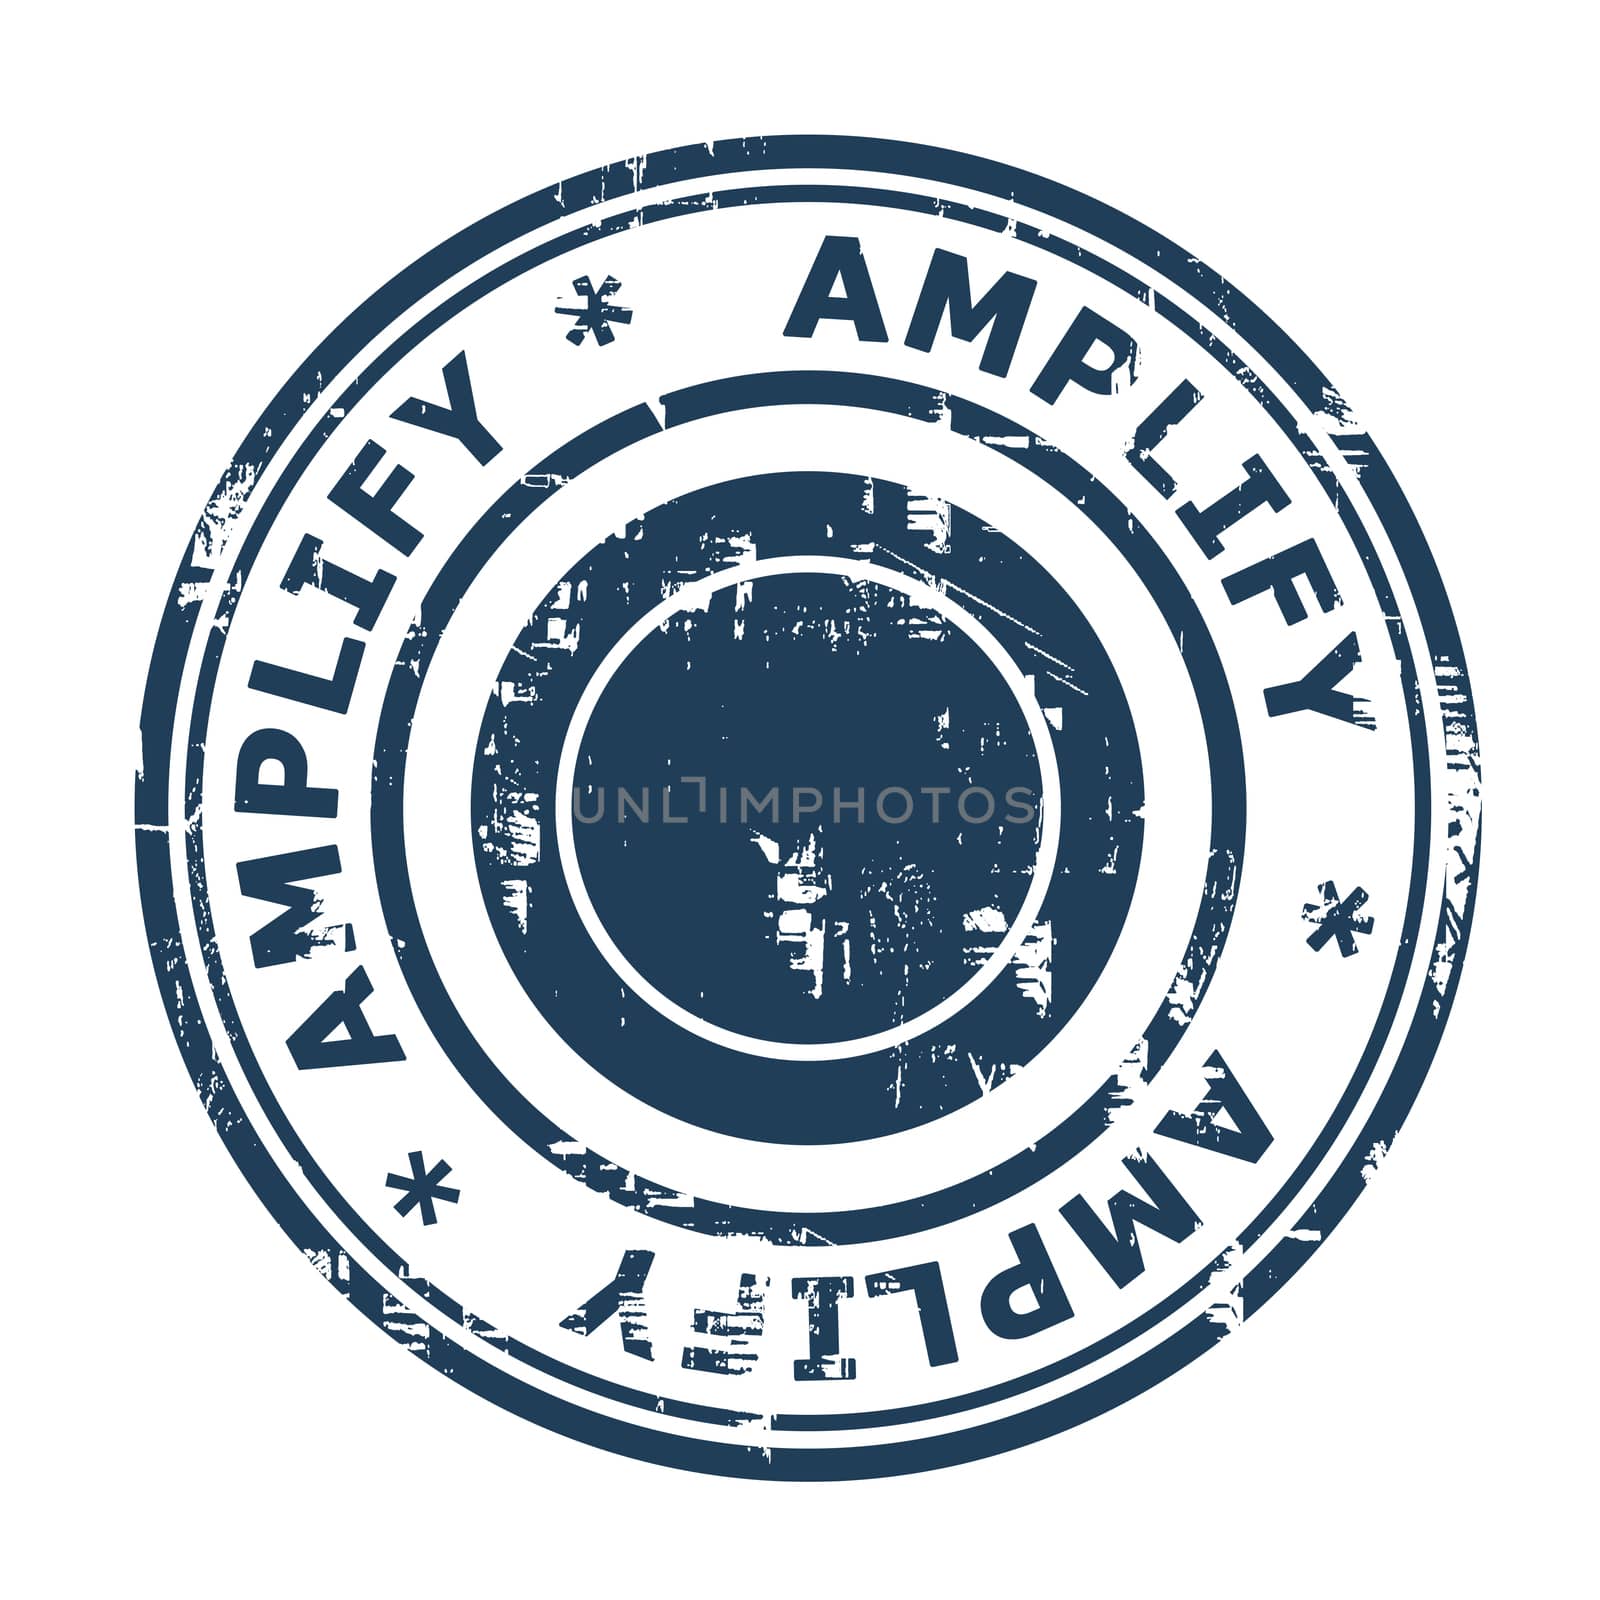 Amplify business concept stamp isolated on a white background.